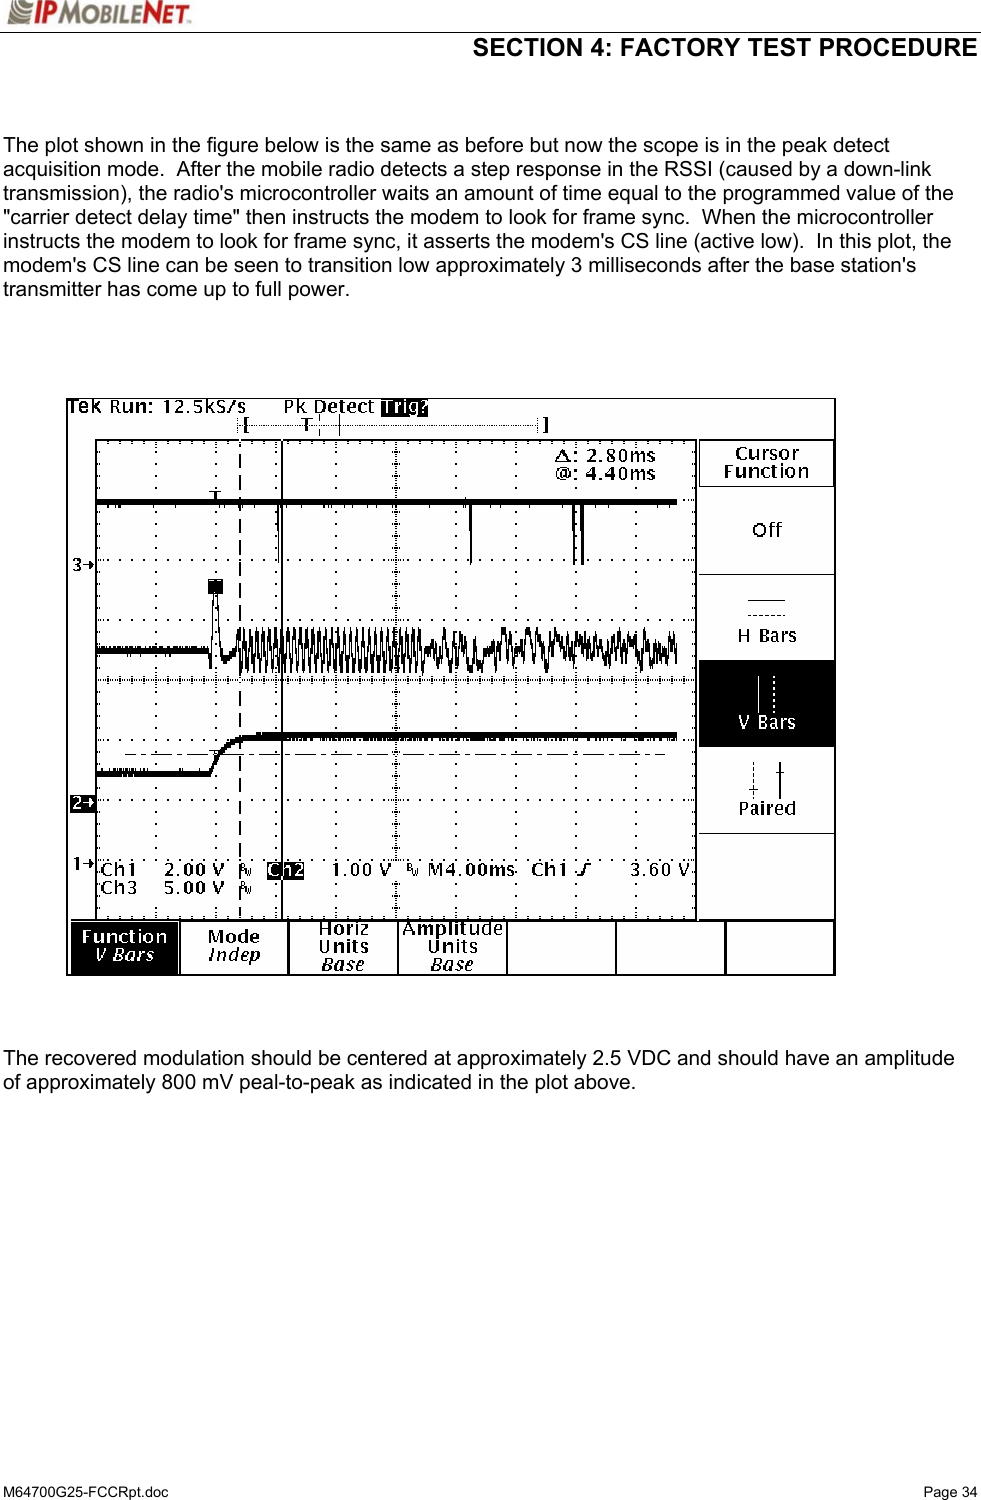  SECTION 4: FACTORY TEST PROCEDURE  M64700G25-FCCRpt.doc   Page 34   The plot shown in the figure below is the same as before but now the scope is in the peak detect acquisition mode.  After the mobile radio detects a step response in the RSSI (caused by a down-link transmission), the radio&apos;s microcontroller waits an amount of time equal to the programmed value of the &quot;carrier detect delay time&quot; then instructs the modem to look for frame sync.  When the microcontroller instructs the modem to look for frame sync, it asserts the modem&apos;s CS line (active low).  In this plot, the modem&apos;s CS line can be seen to transition low approximately 3 milliseconds after the base station&apos;s transmitter has come up to full power.         The recovered modulation should be centered at approximately 2.5 VDC and should have an amplitude of approximately 800 mV peal-to-peak as indicated in the plot above.  